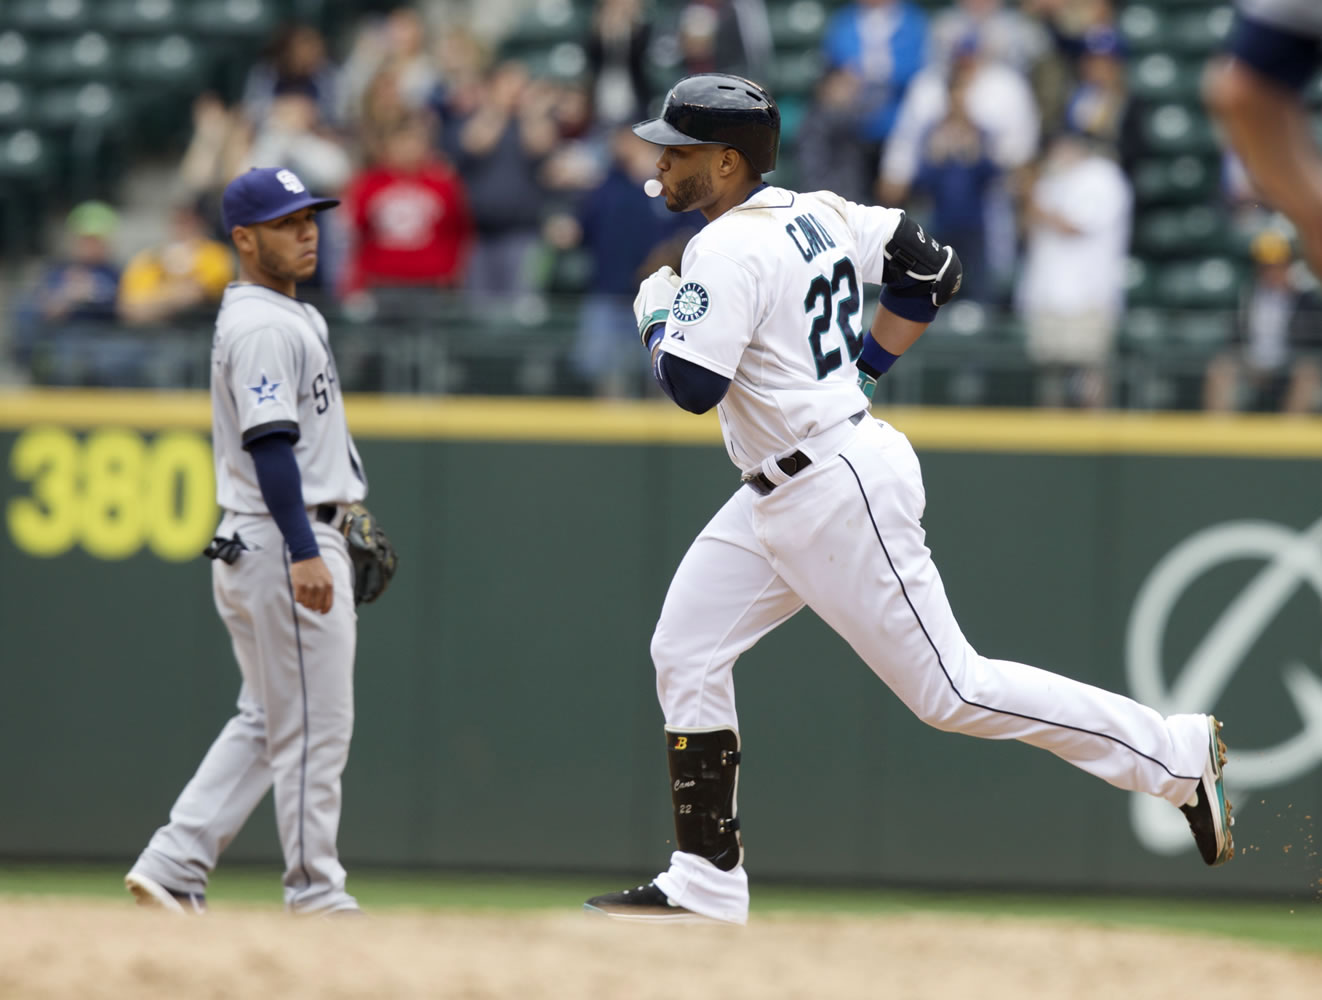 Seattle Mariners' Robinson Cano, right, blows a bubble as he rounds the bases after hitting a two-run home run during the fifth inning against the San Diego Padres in Seattle, Tuesday.